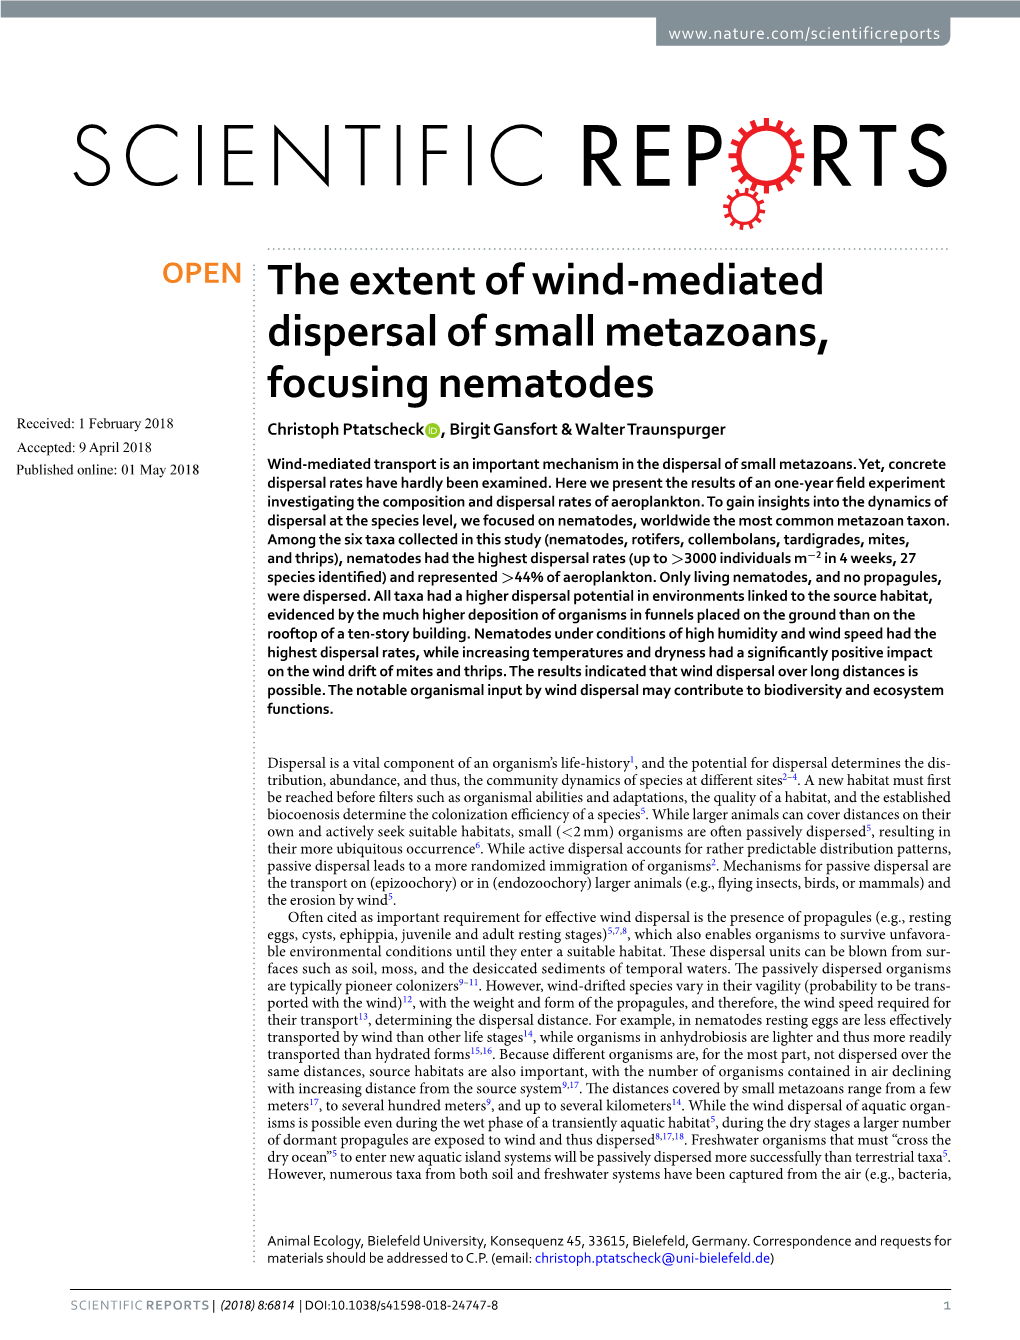 The Extent of Wind-Mediated Dispersal of Small Metazoans, Focusing